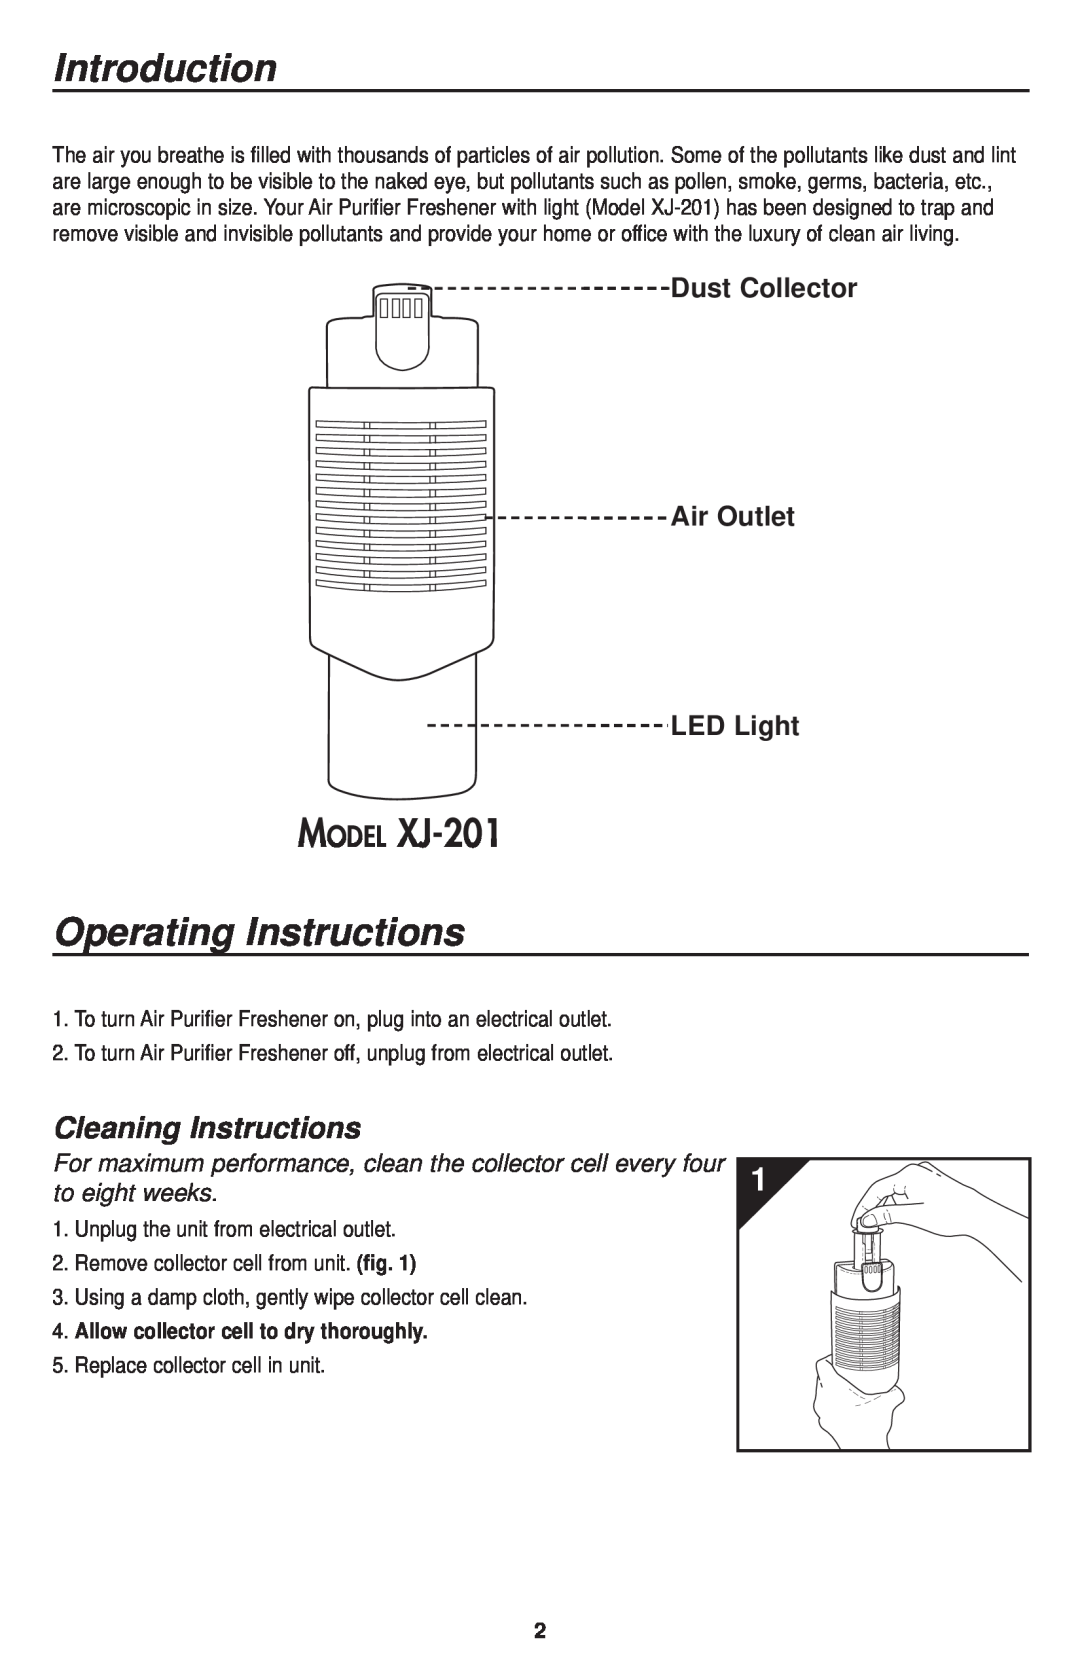 Oreck Introduction, Operating Instructions, MODEL XJ-201, Cleaning Instructions, Dust Collector Air Outlet LED Light 